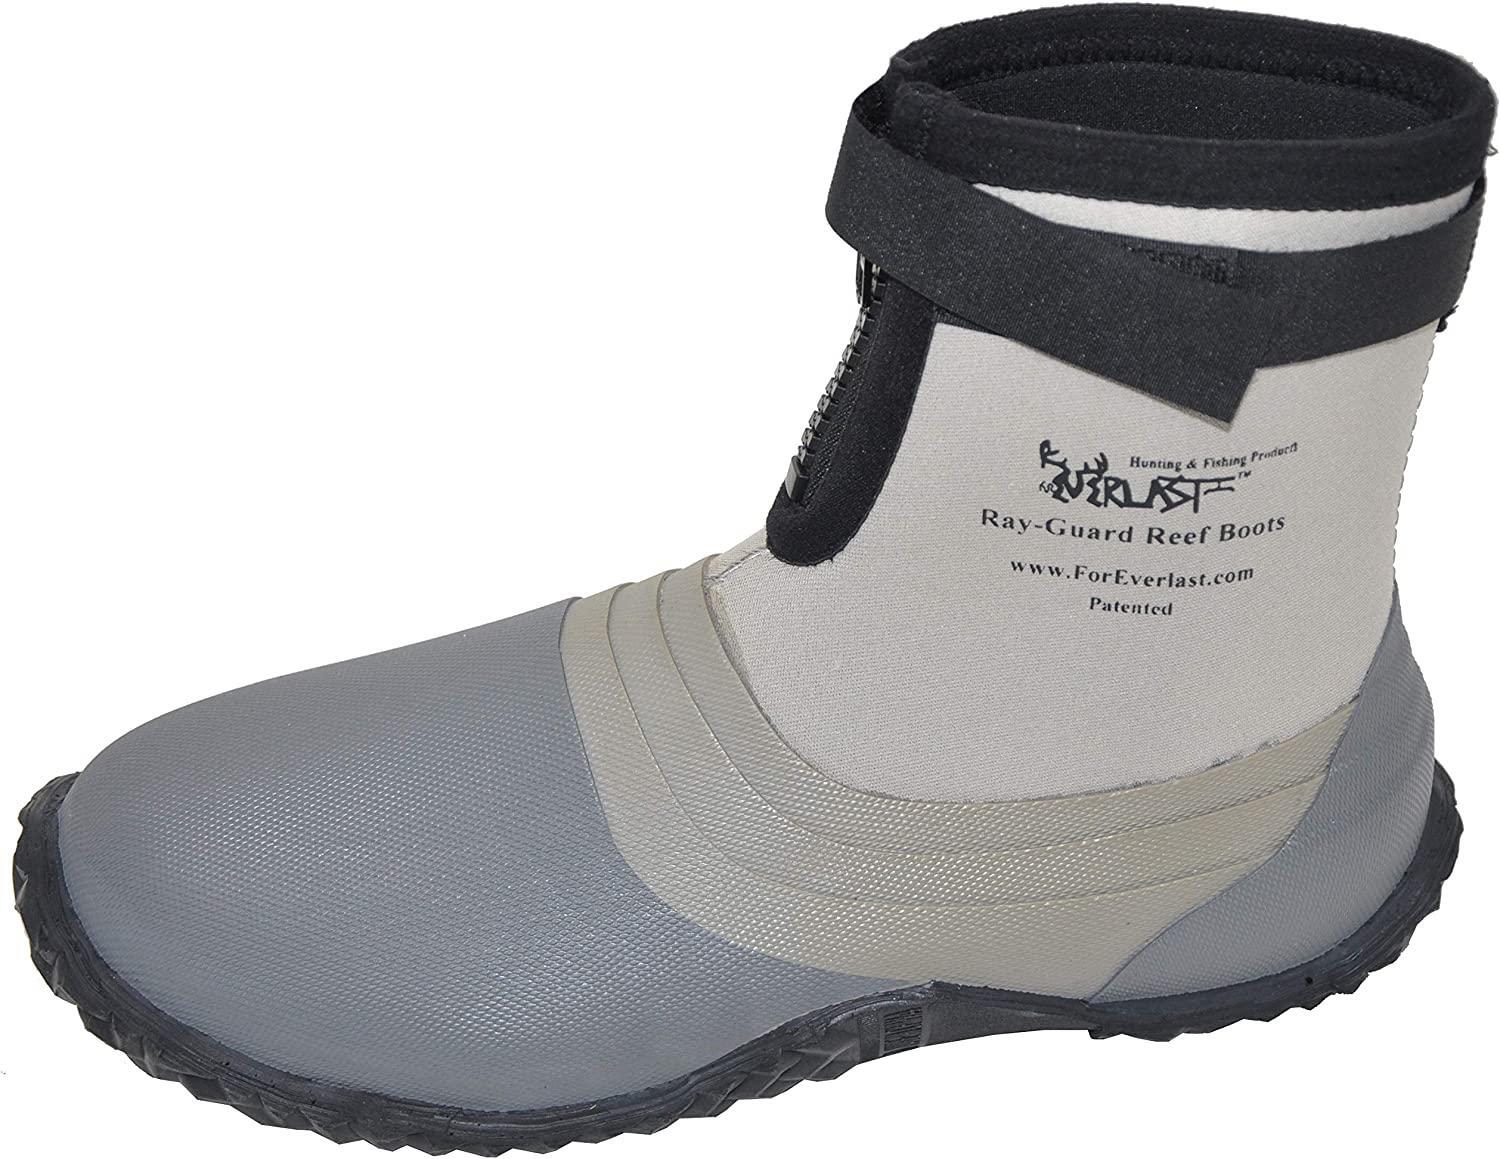 Foreverlast Ray-Guard Reef Wading & Fishing Boots Generation II for Men and  Women, Grey, Size 3, Hard Soled Vulcanized Rubber Bottom, Neoprene,  Lightweight